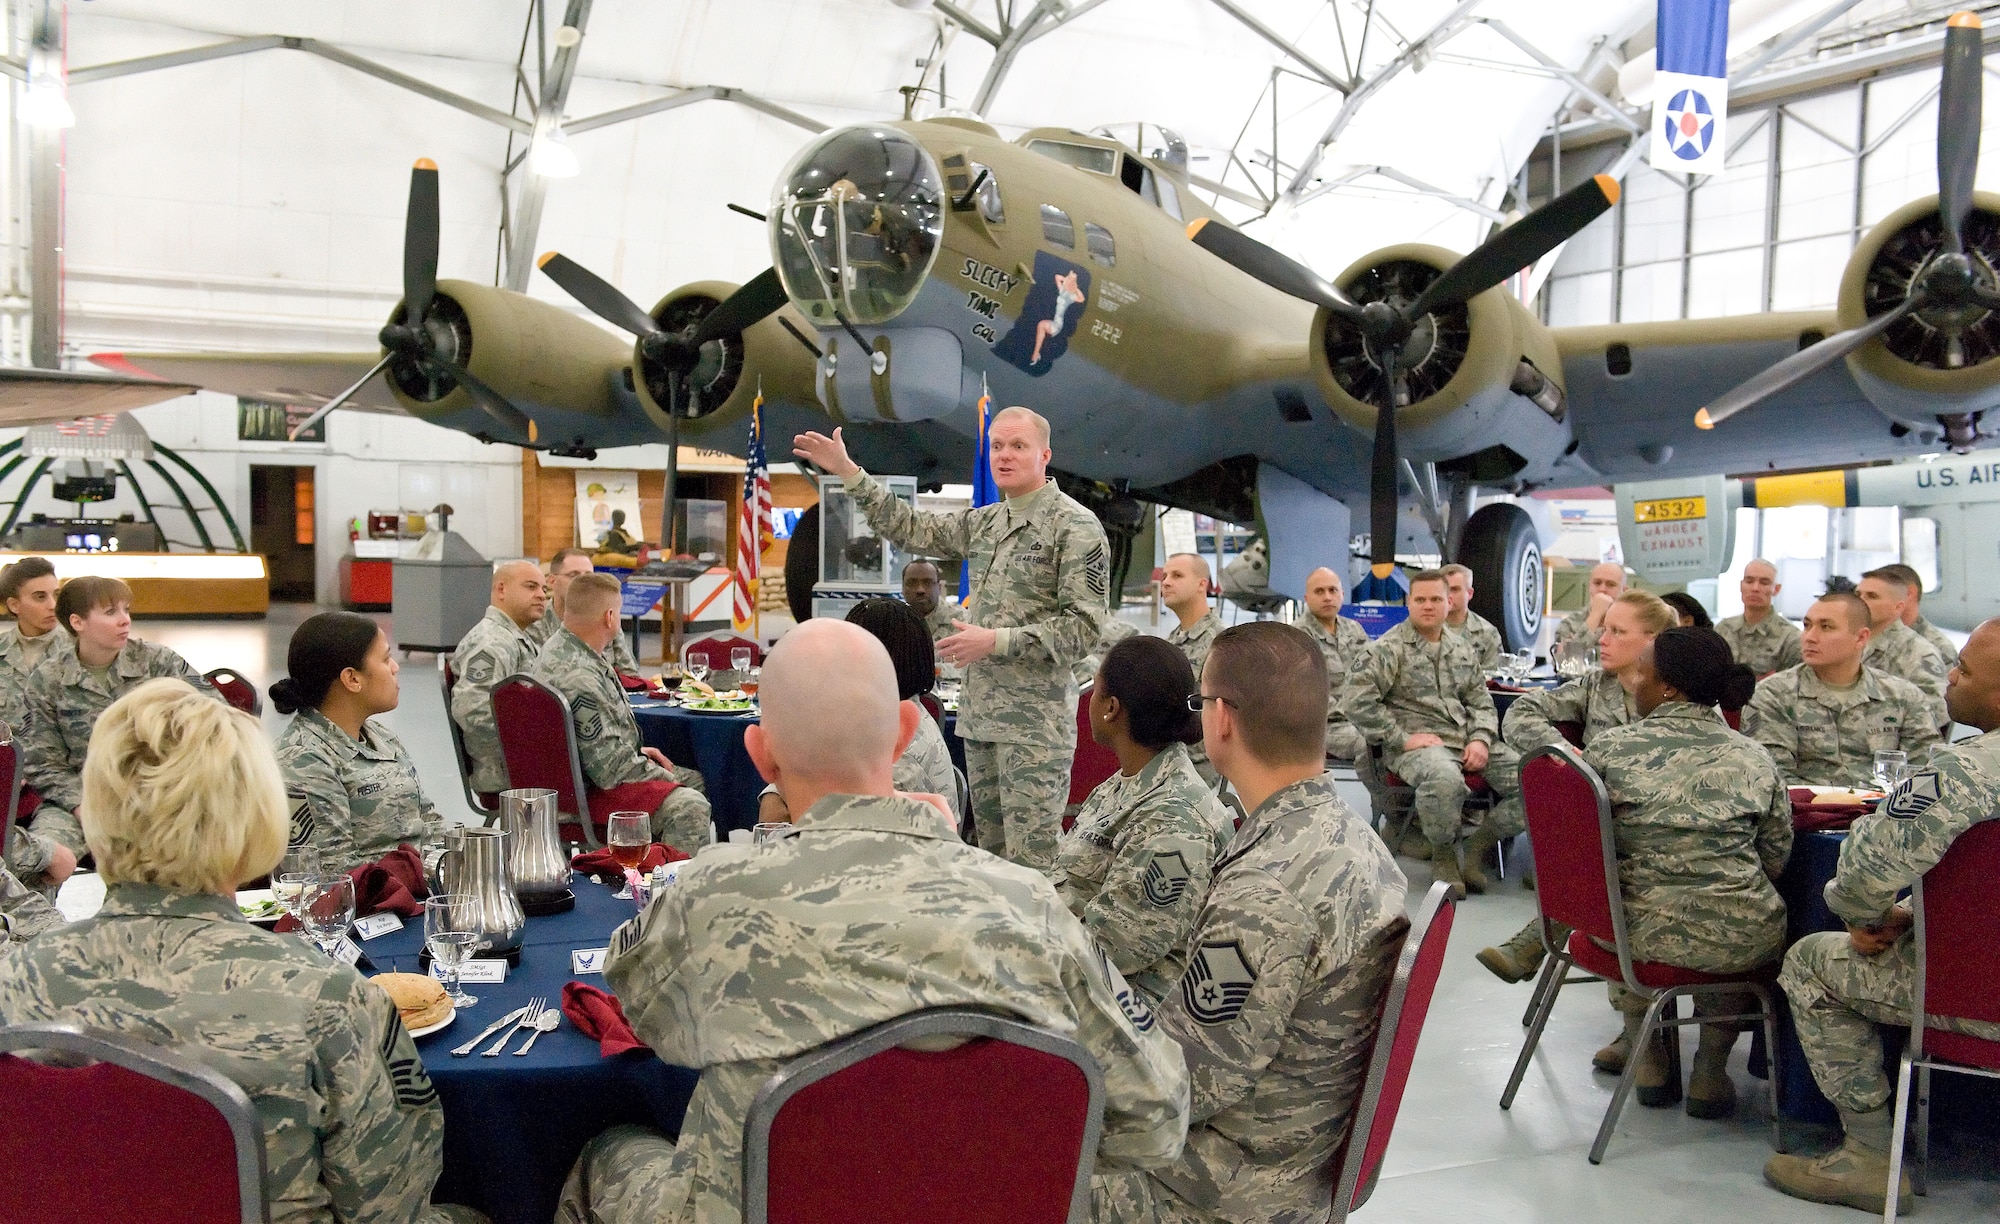 Chief Master Sgt. of the Air Force James Cody speaks to base senior NCOs prior to having lunch Nov. 18, 2014, at the Air Mobility Command Museum on Dover Air Force Base, Del. Cody spoke on numerous topics pertaining to Air Force personnel and opened to floor to questions. (U.S. Air Force photo/Roland Balik)